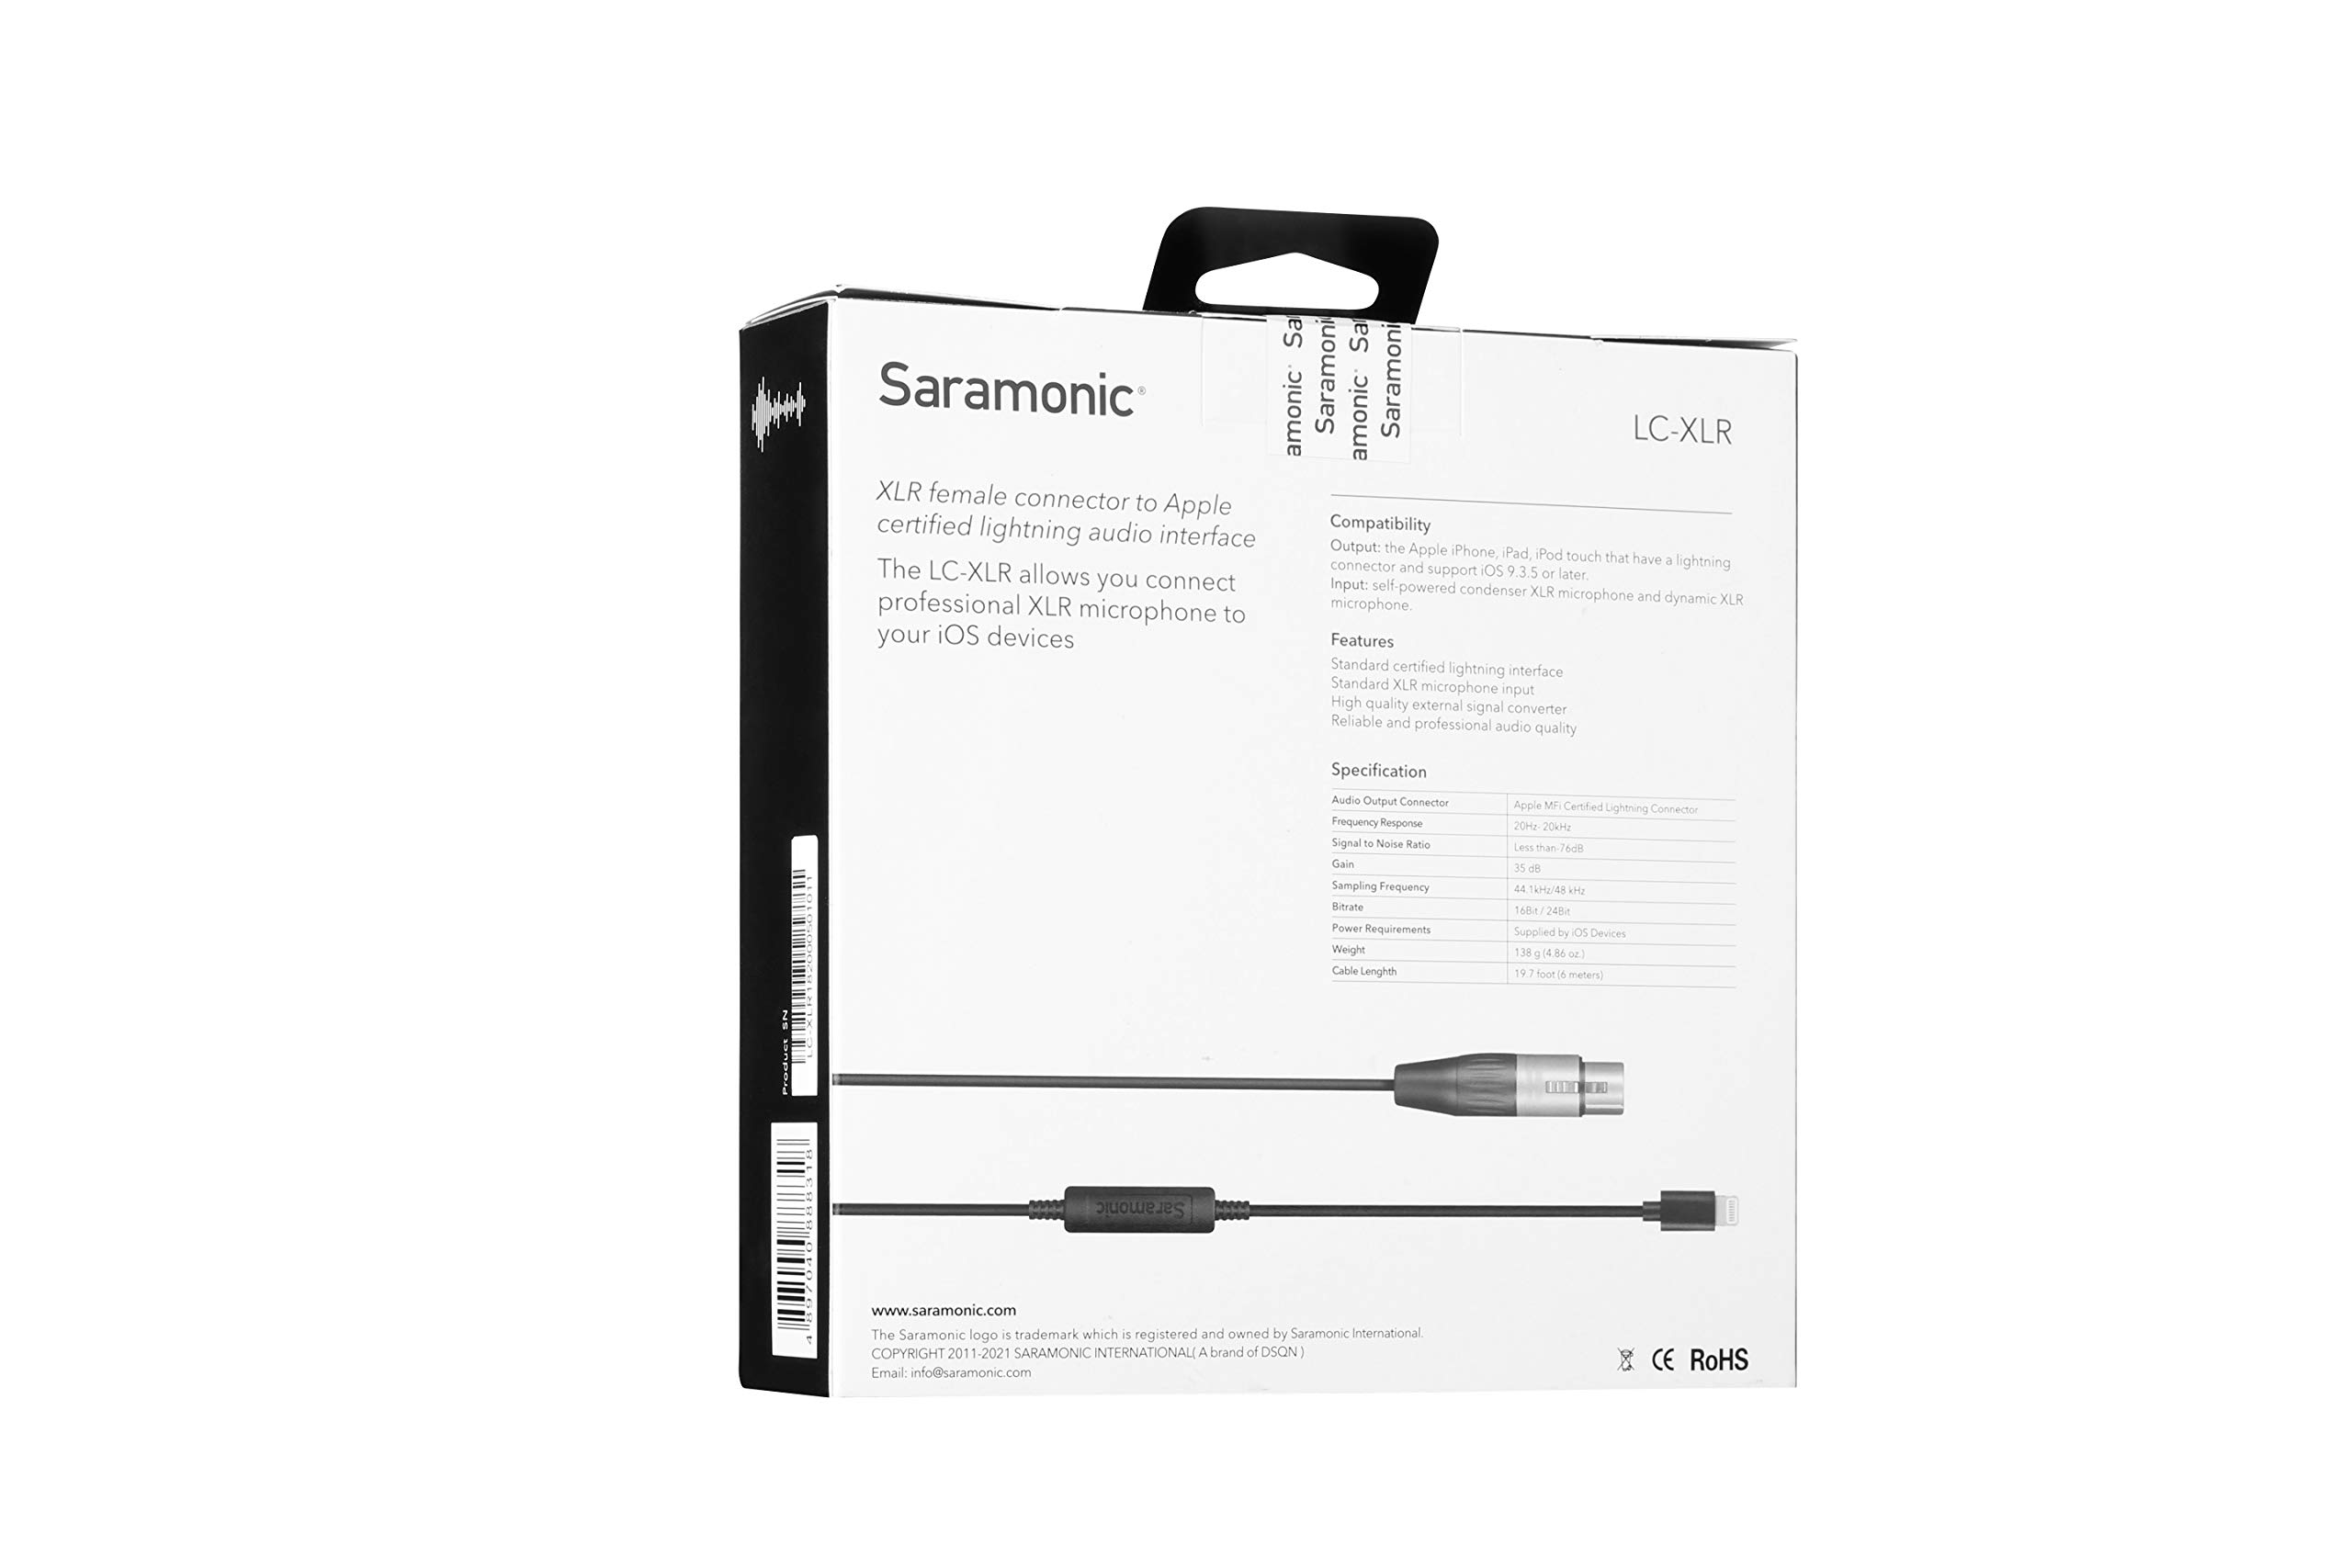 Saramonic XLR Female to Apple Lightning Microphone Interface Cable for iPhone & iPad (LC-XLR)